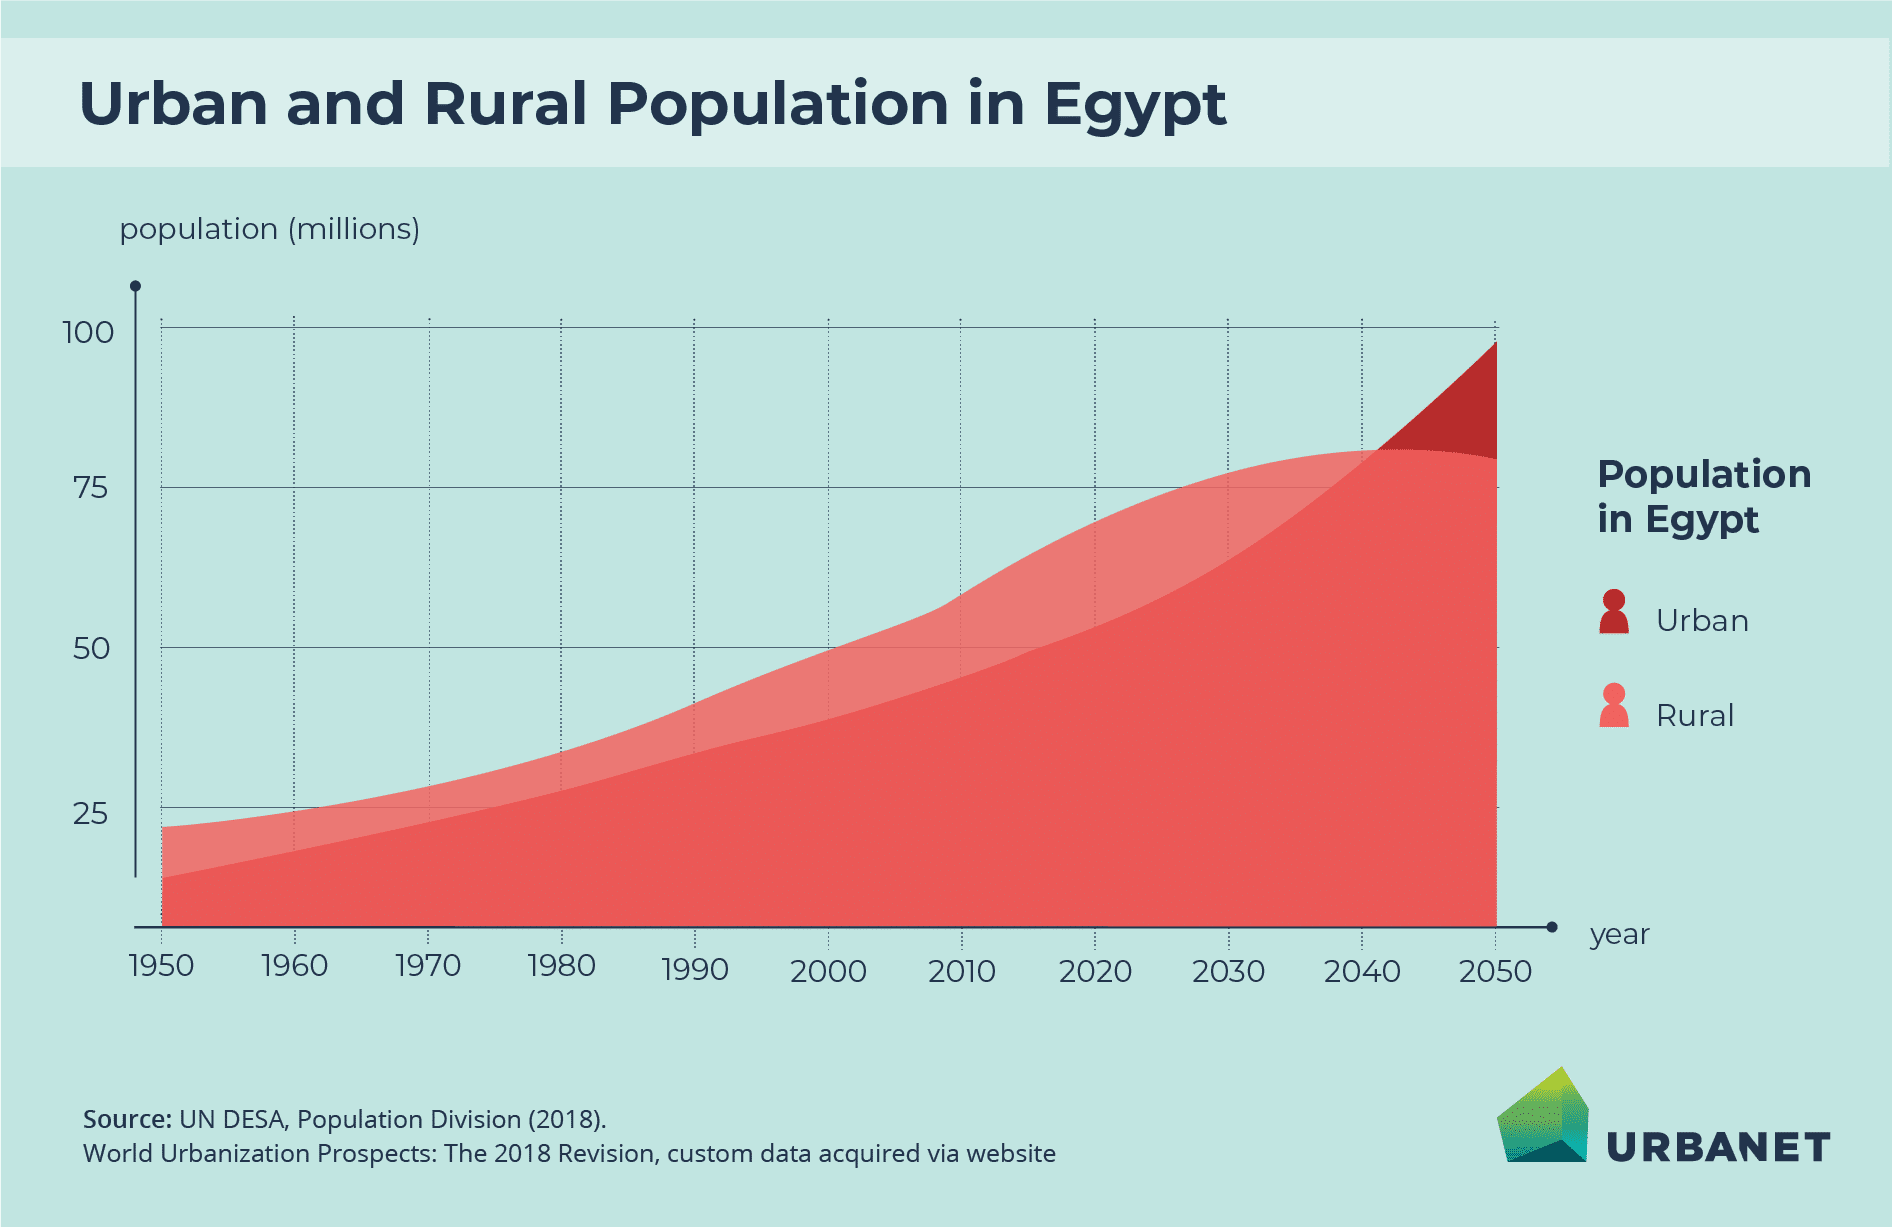 Egypt's urban population is projected to outnumber people living in rural areas for the first time in 2041. By then, 69 million people will live in urban areas.